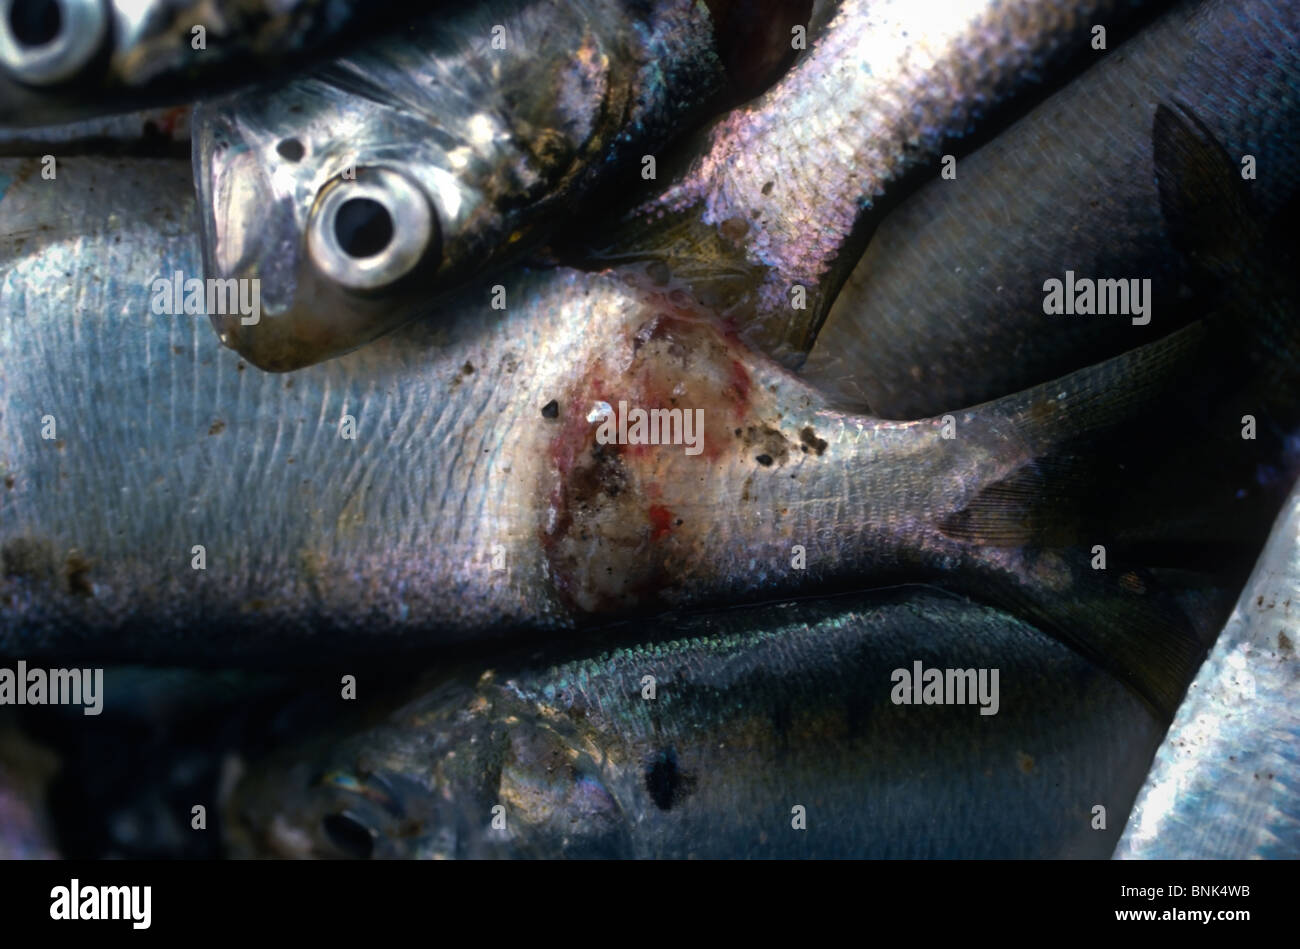 SHELLTOWN, MD, USA - 1997/09/25: Menhaden fish with open sores from the flesh eating Pfiesteria disease outbreak in the Pocomoke River along the Chesapeake Bay September 25, 1997 in Shelltown, Maryland. The outbreak caused a loss of $43 million dollars in fishing revenue and is believed to be caused by the runoff of chicken manure from farms in the area. (Photo by Richard Ellis) Stock Photo